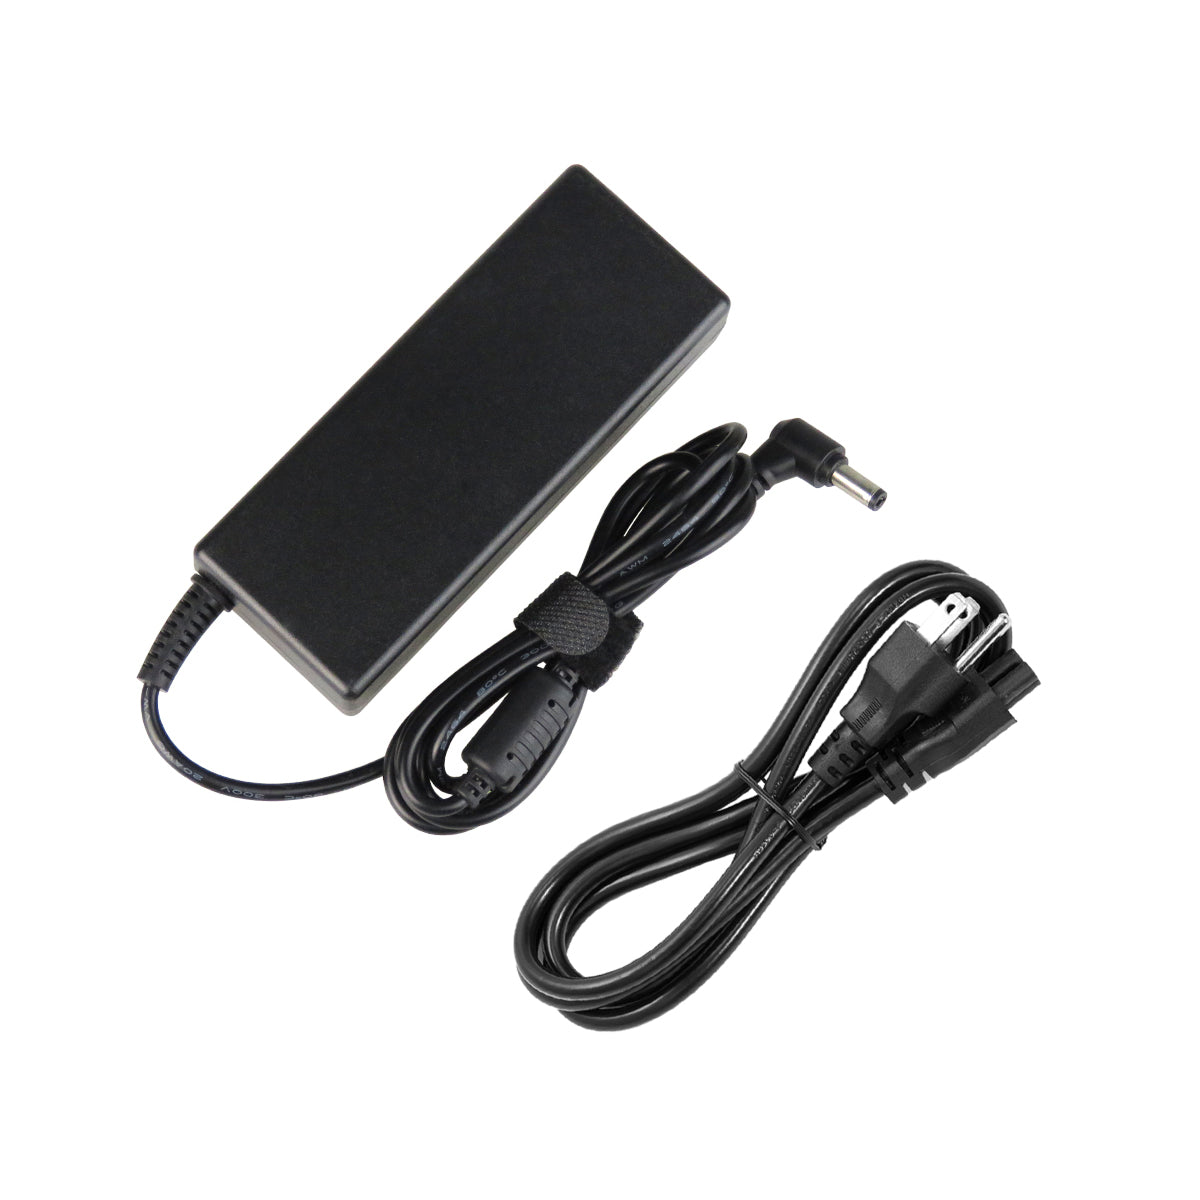 AC Adapter Charger for ASUS X61 Series Notebook.